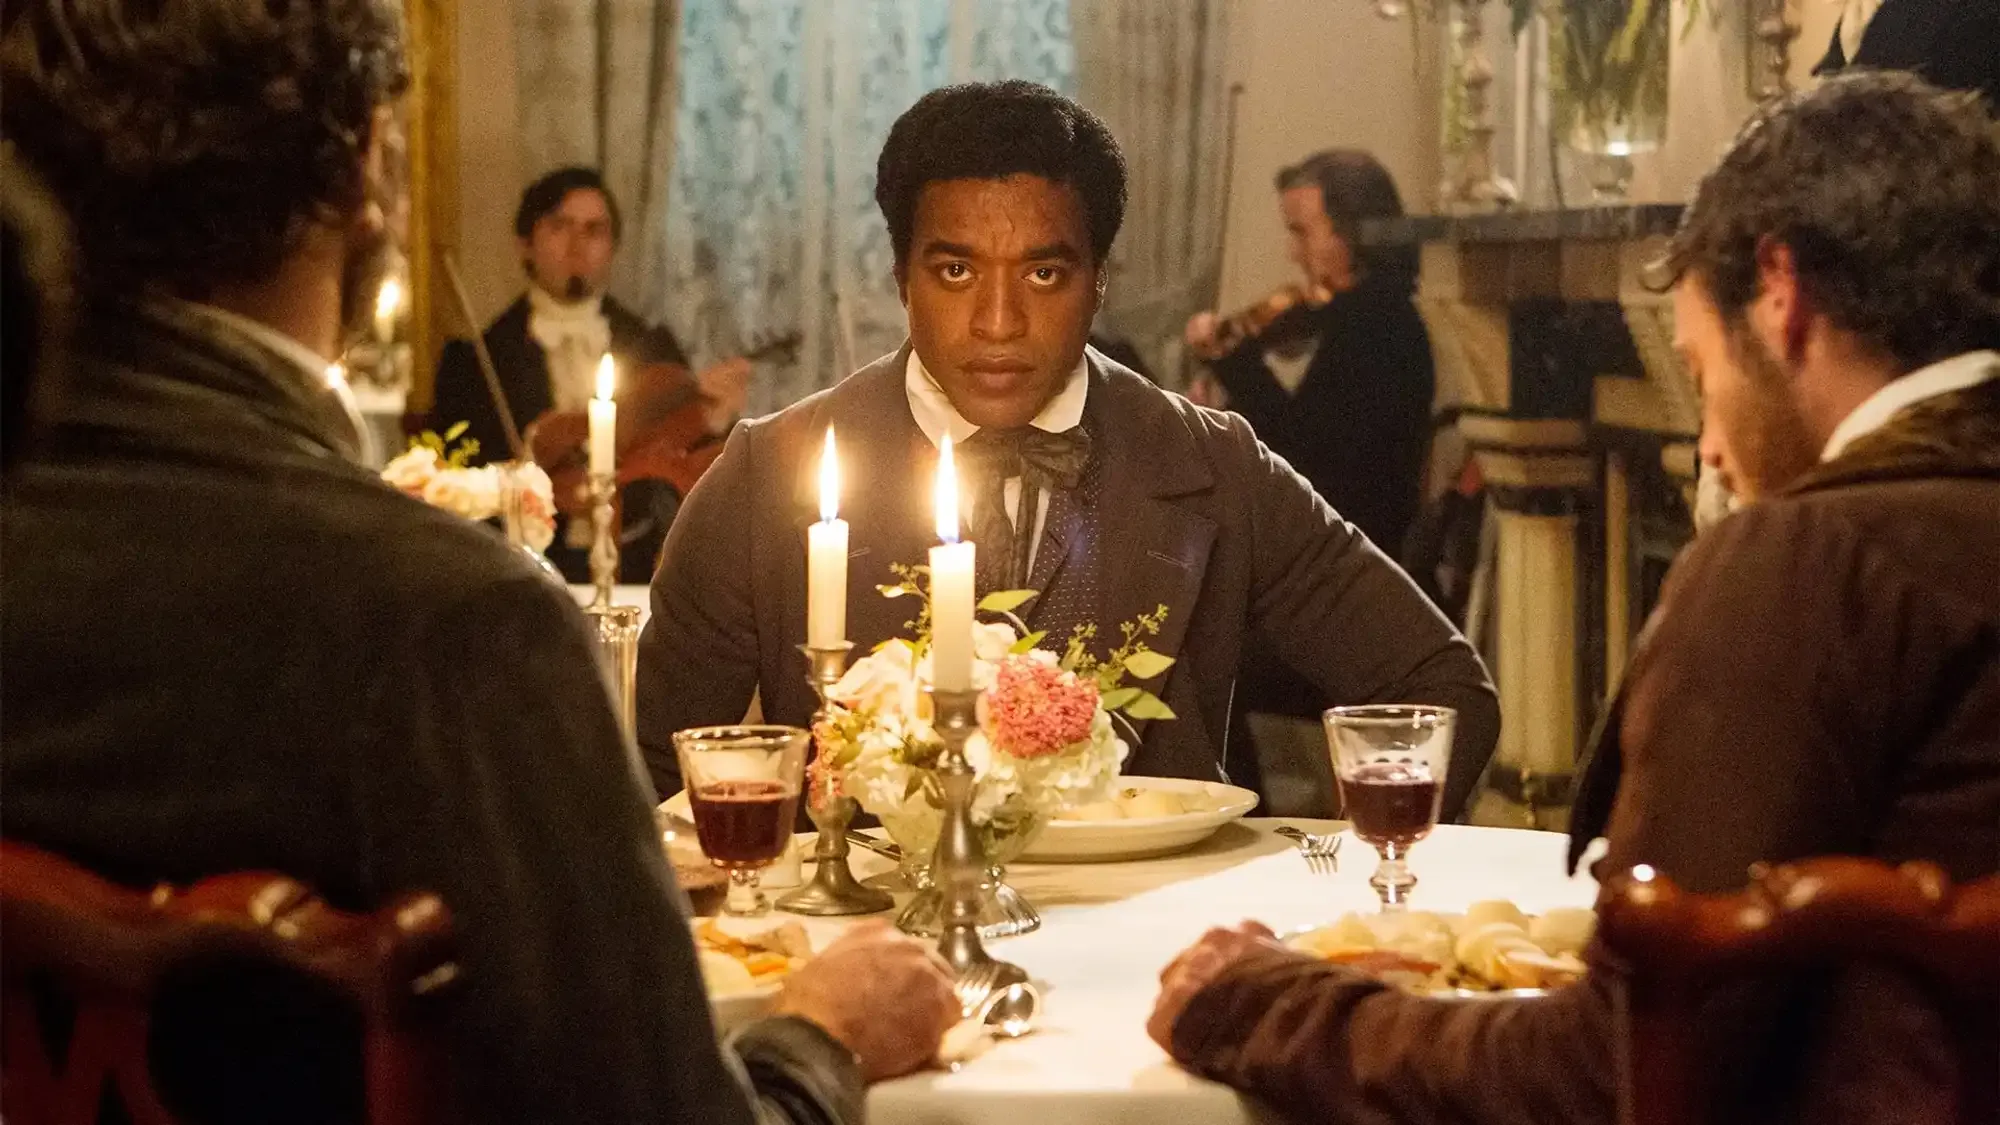 12 Years a Slave movie review